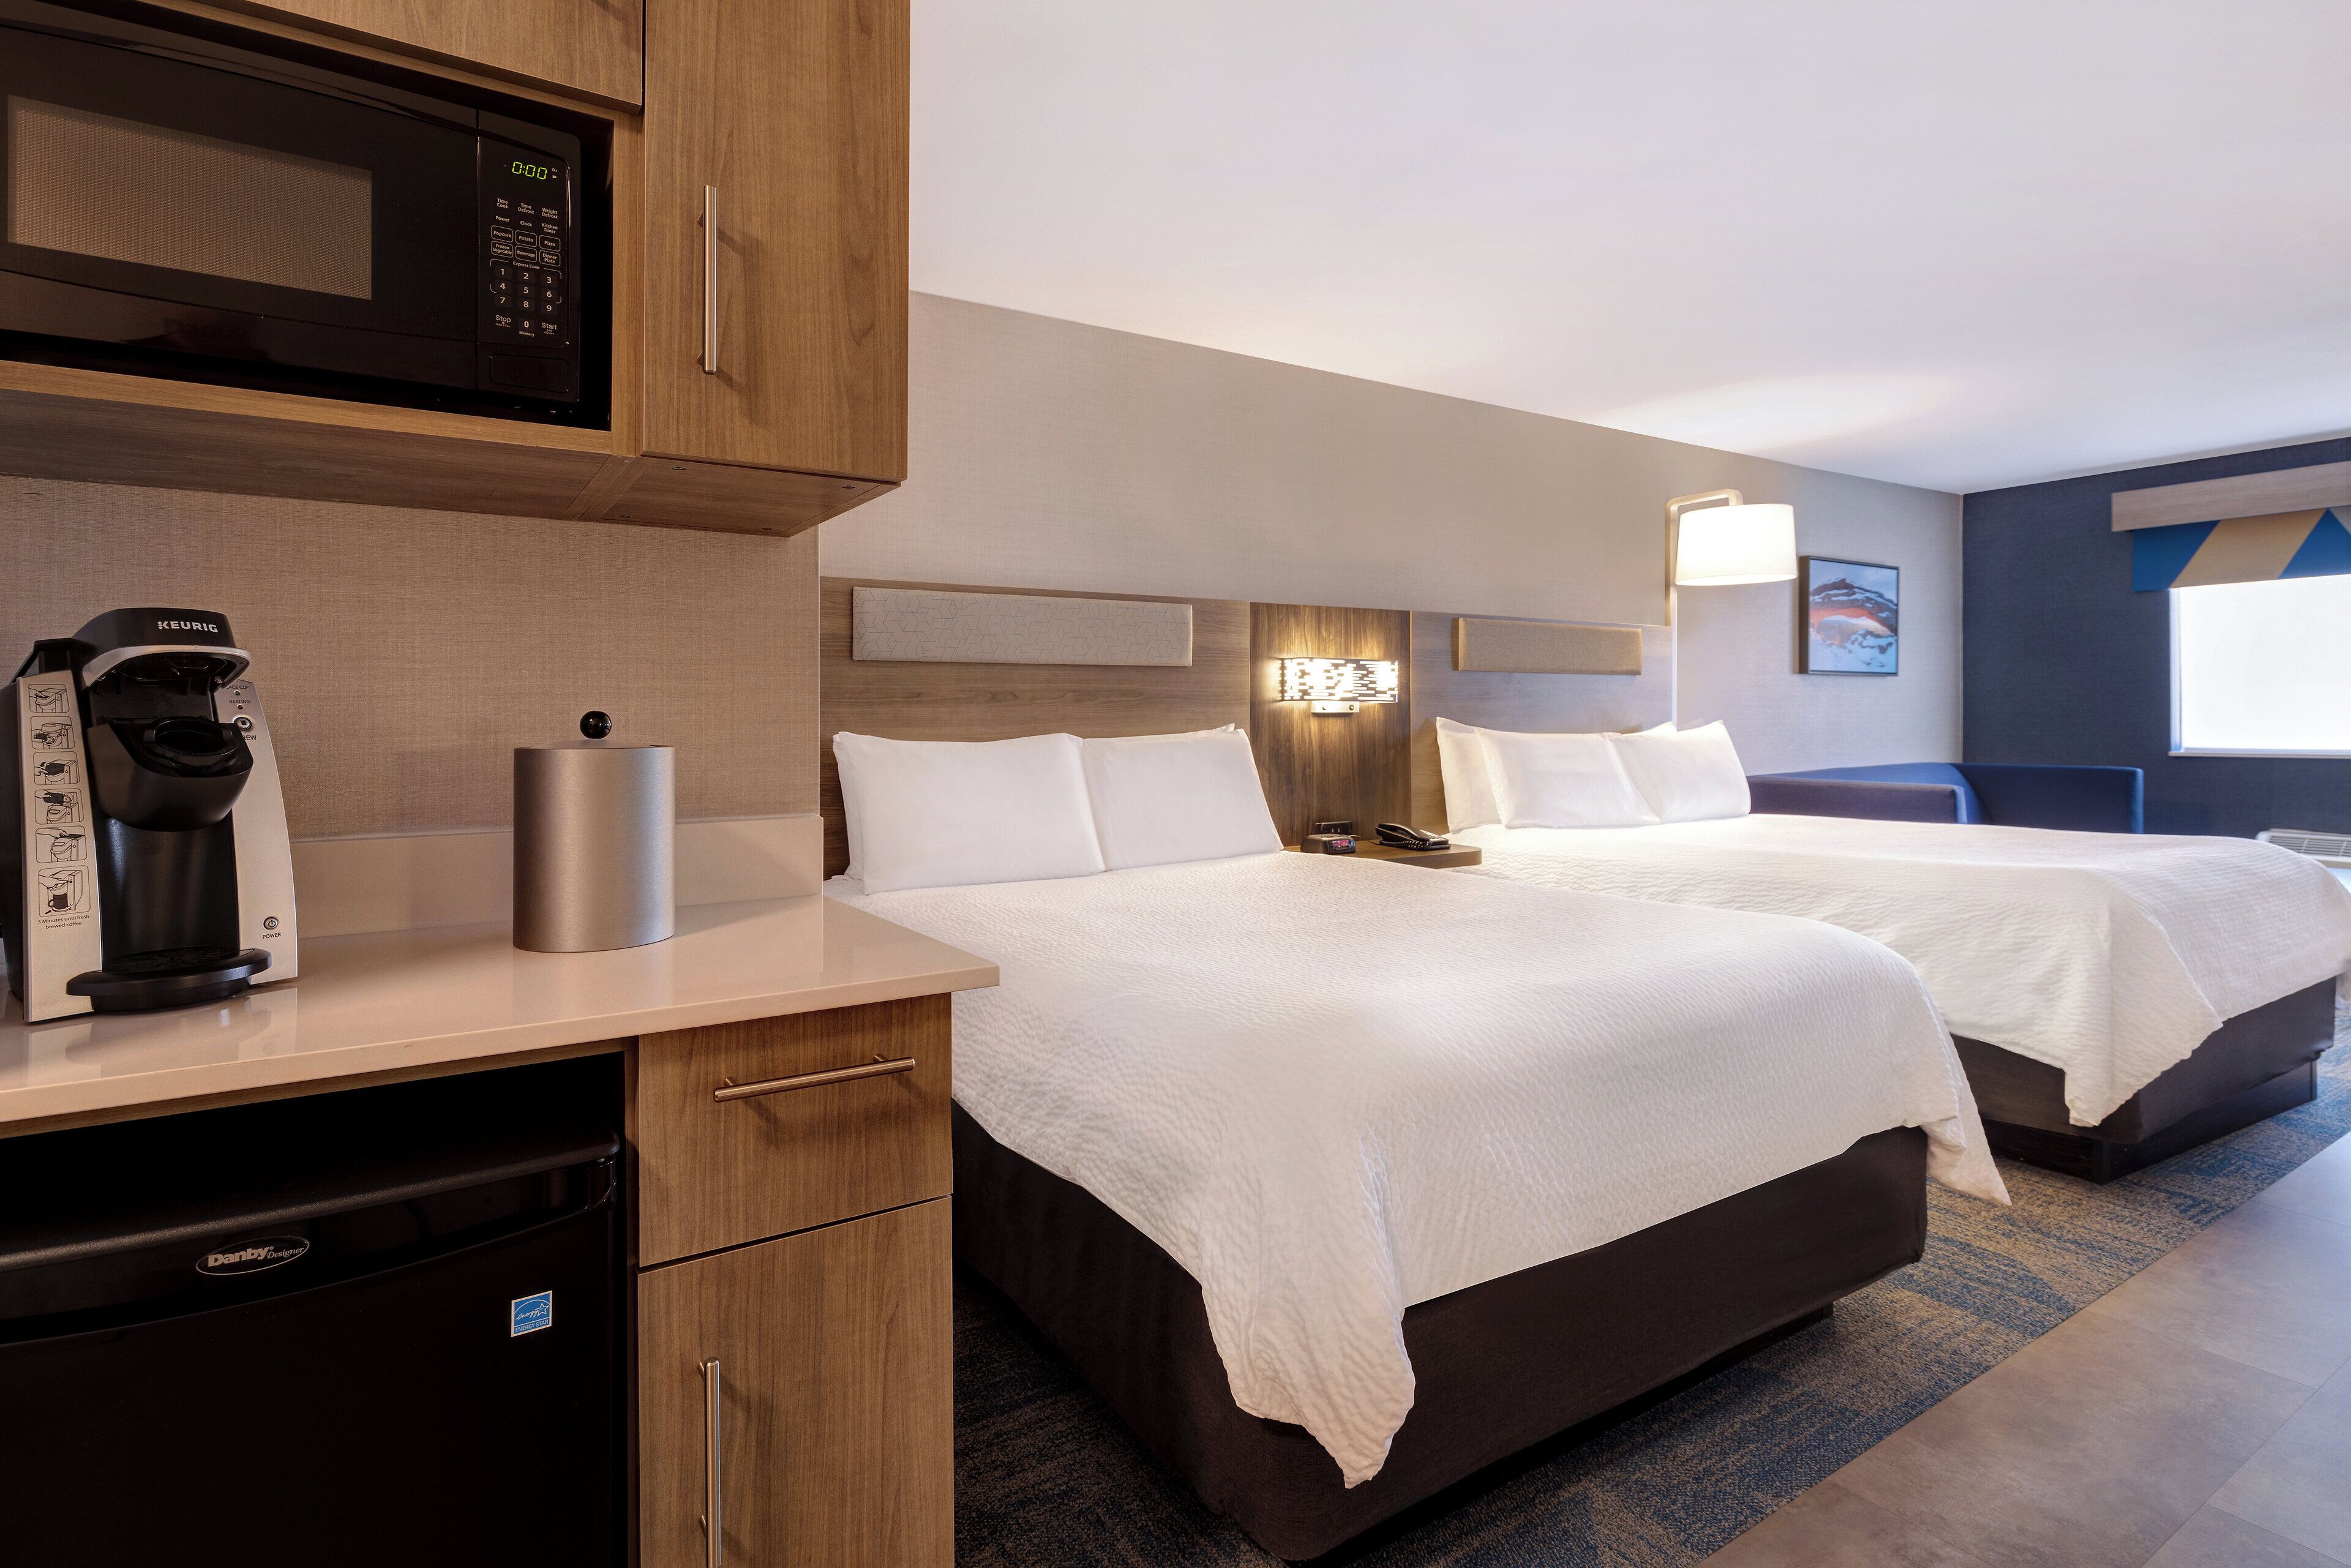 Holiday Inn Express & Suites Moab